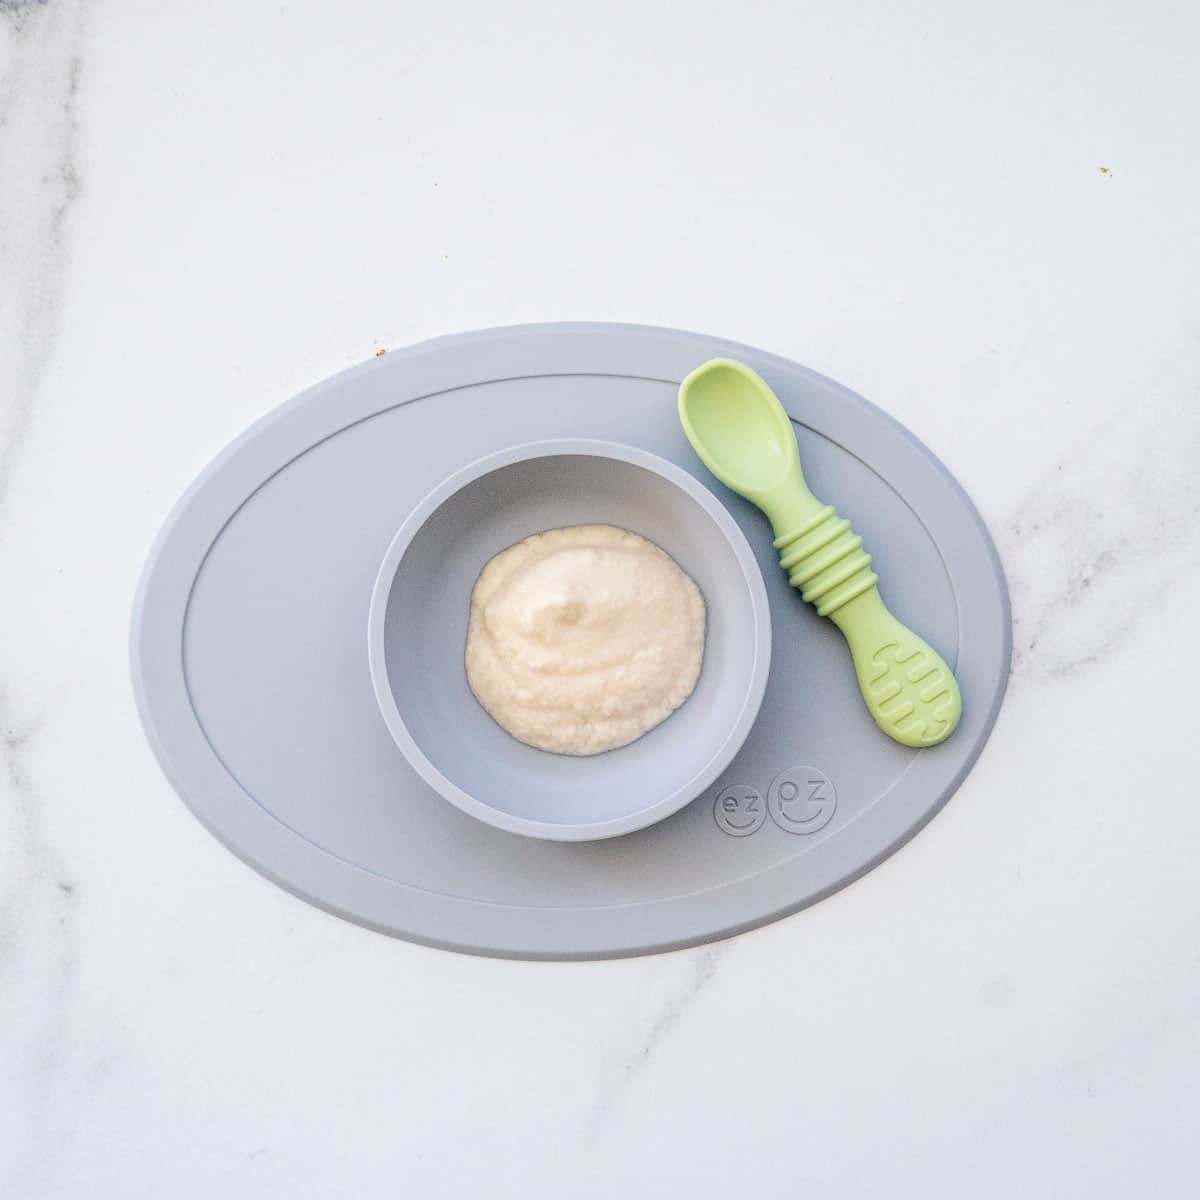 A grey silicone baby plate filled with white puree, with a pale green baby spoon lying to the side.